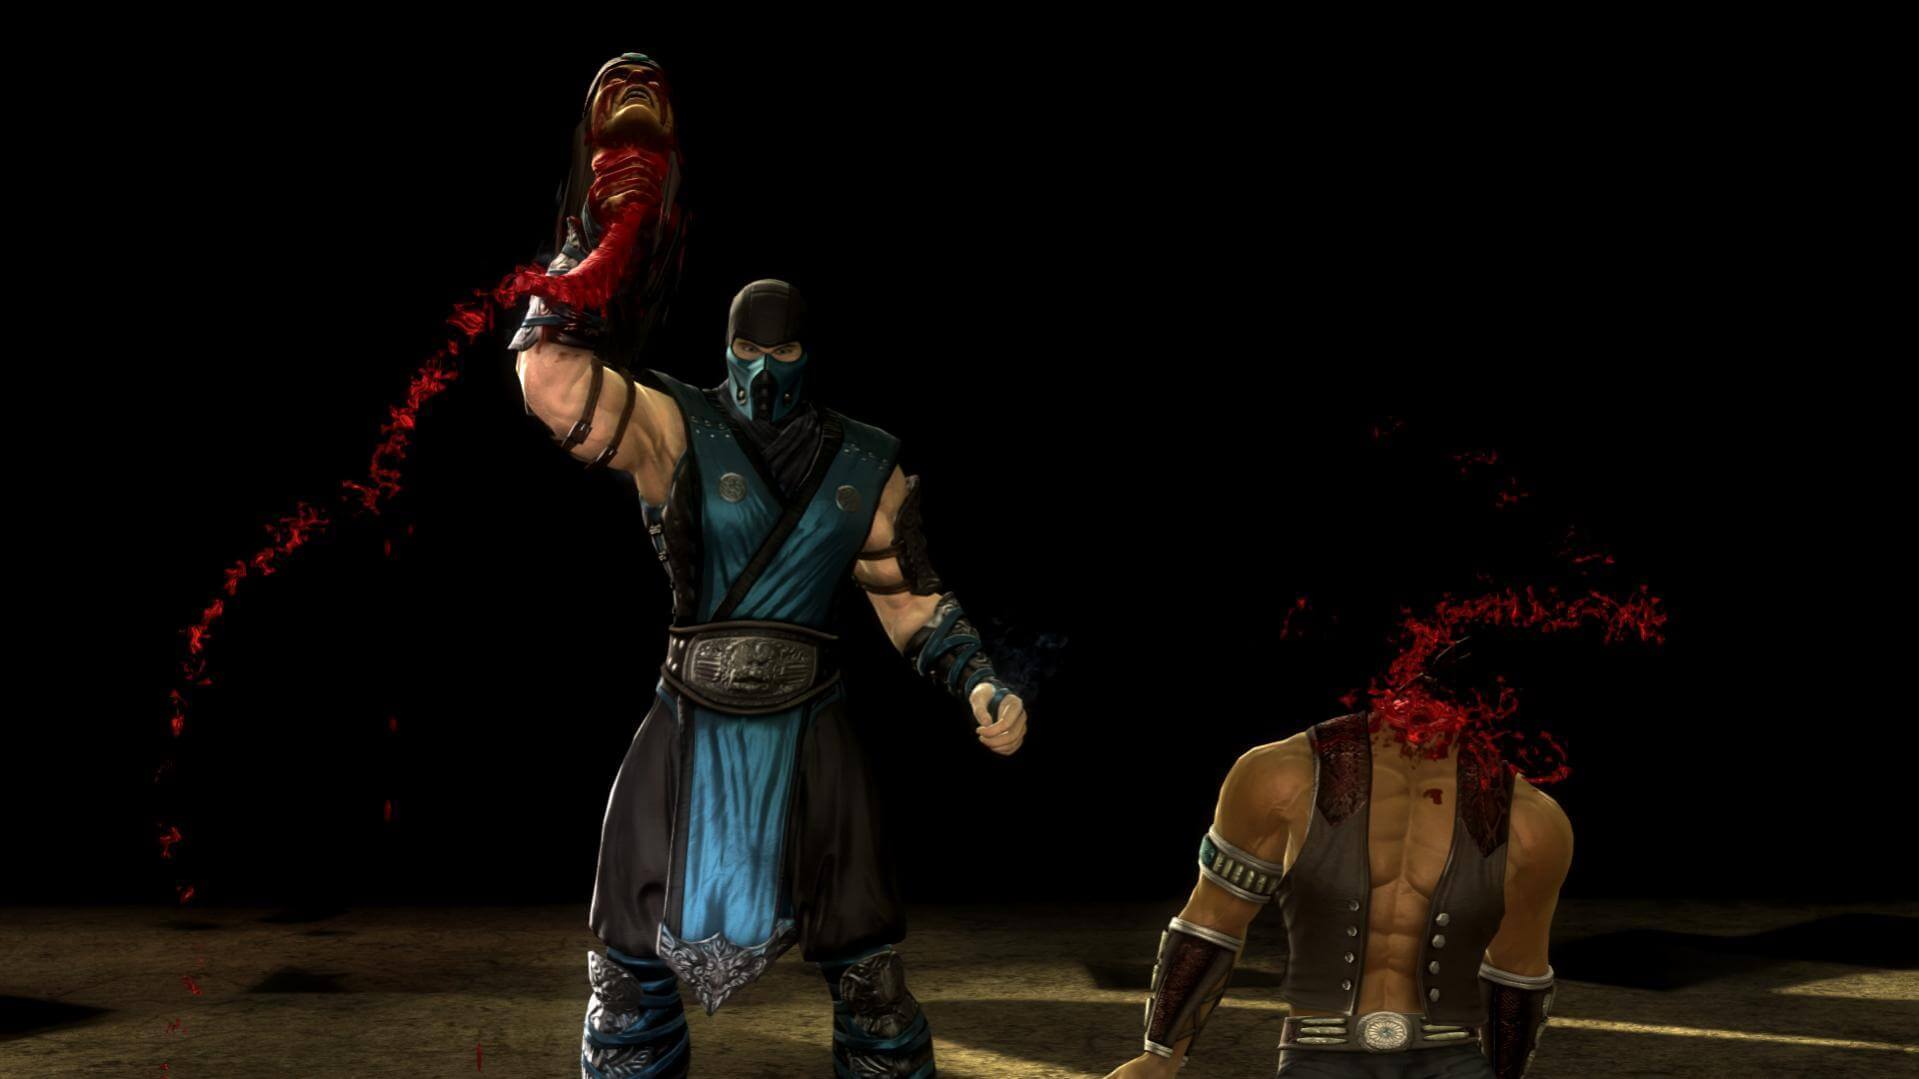 Mortal Kombat Fatalities - Six of the All-Time Most Gruesome!